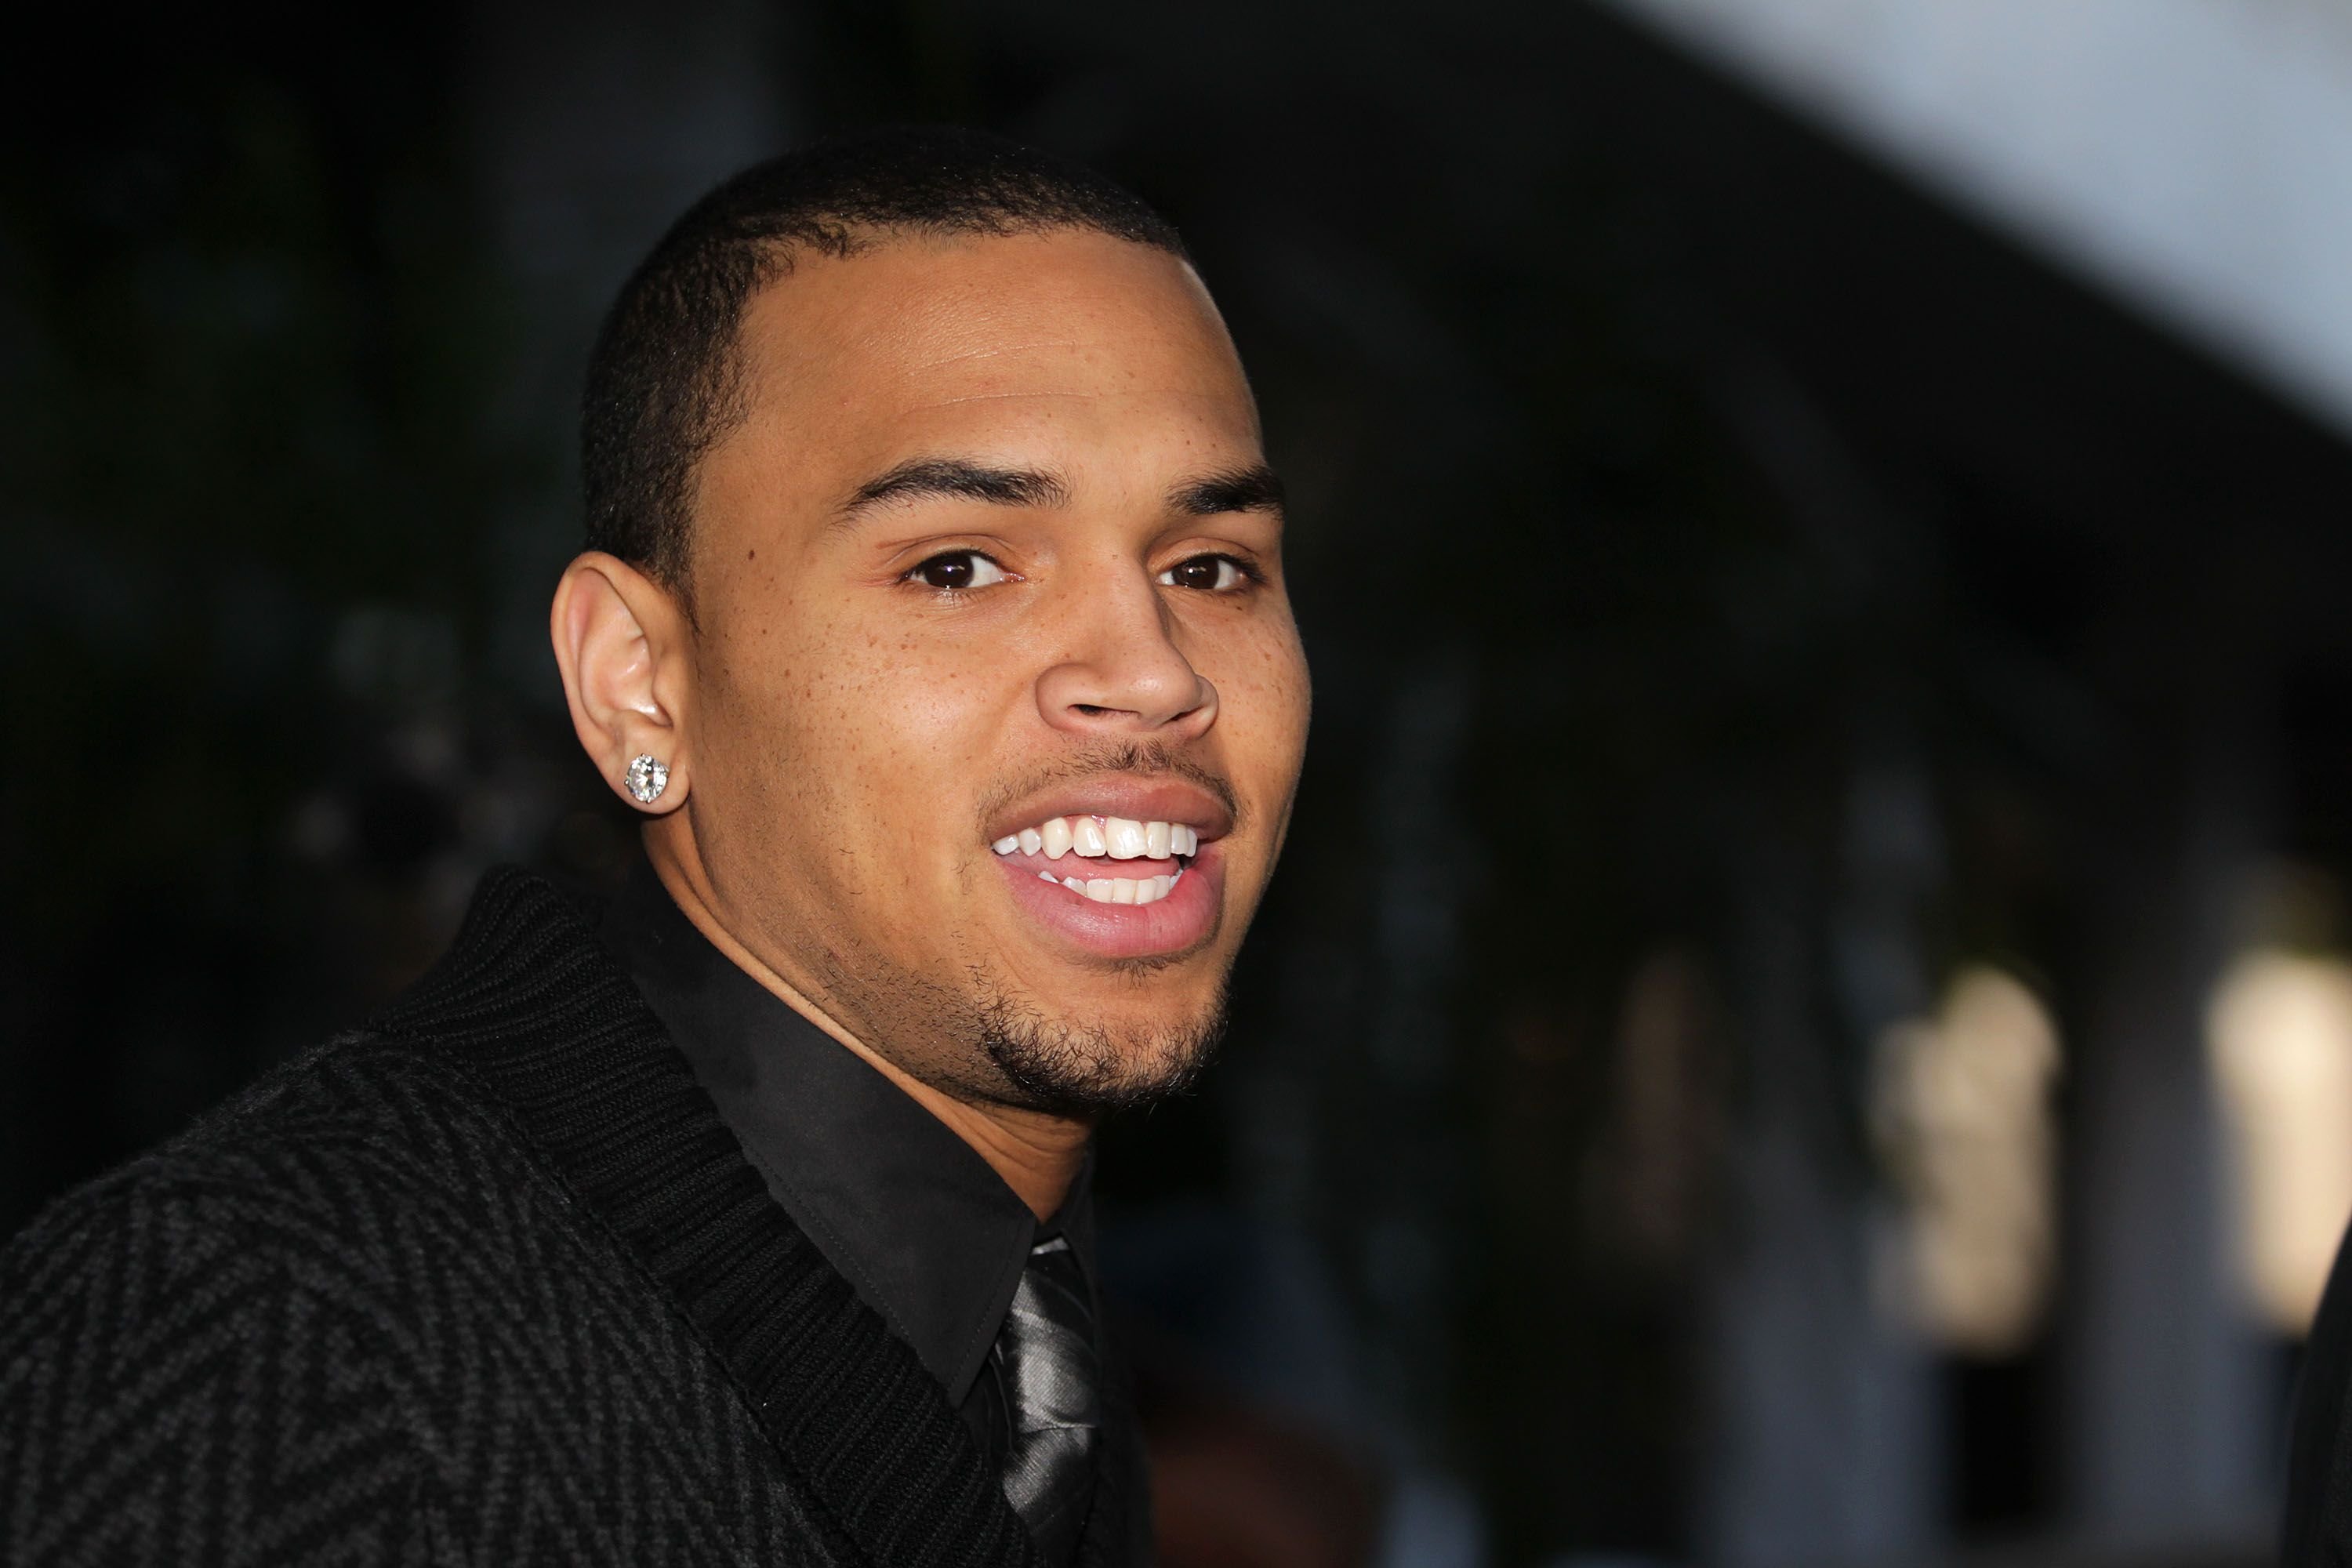 Artist Chris Brown leaves the Los Angeles courthouse in California on January 28, 2011 | Photo: Frederick M. Brown/Getty Images